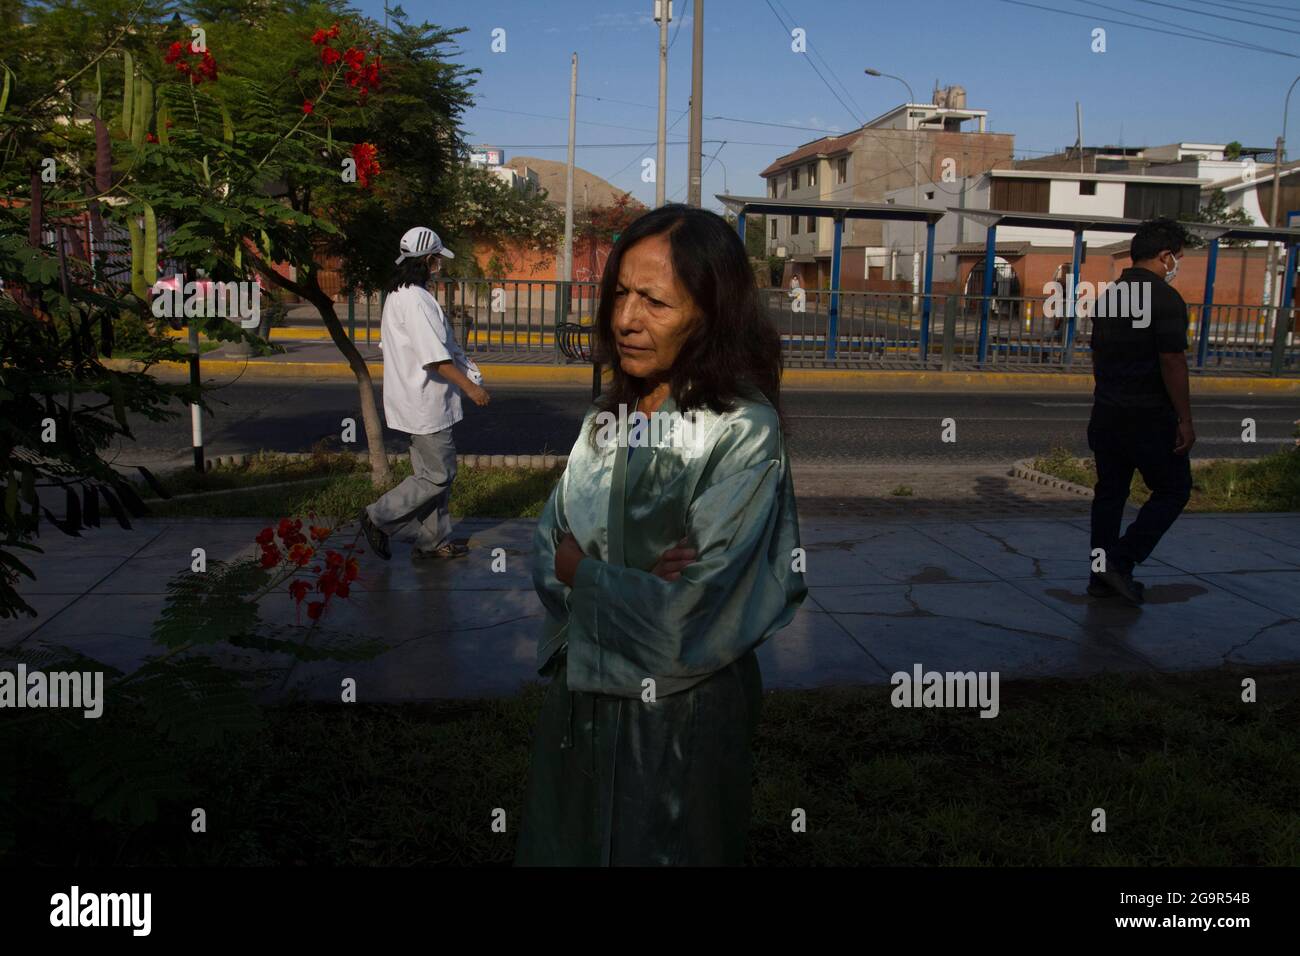 A woman who has been taking medication for bipolar for almost 40 years, is now using religion as her main support system. Since the Covid 19 pandemic, she has been living in fear confined to her house. The Covid-19 pandemic has been harmful to millions of people living with mental illness around the world. Peru. Stock Photo